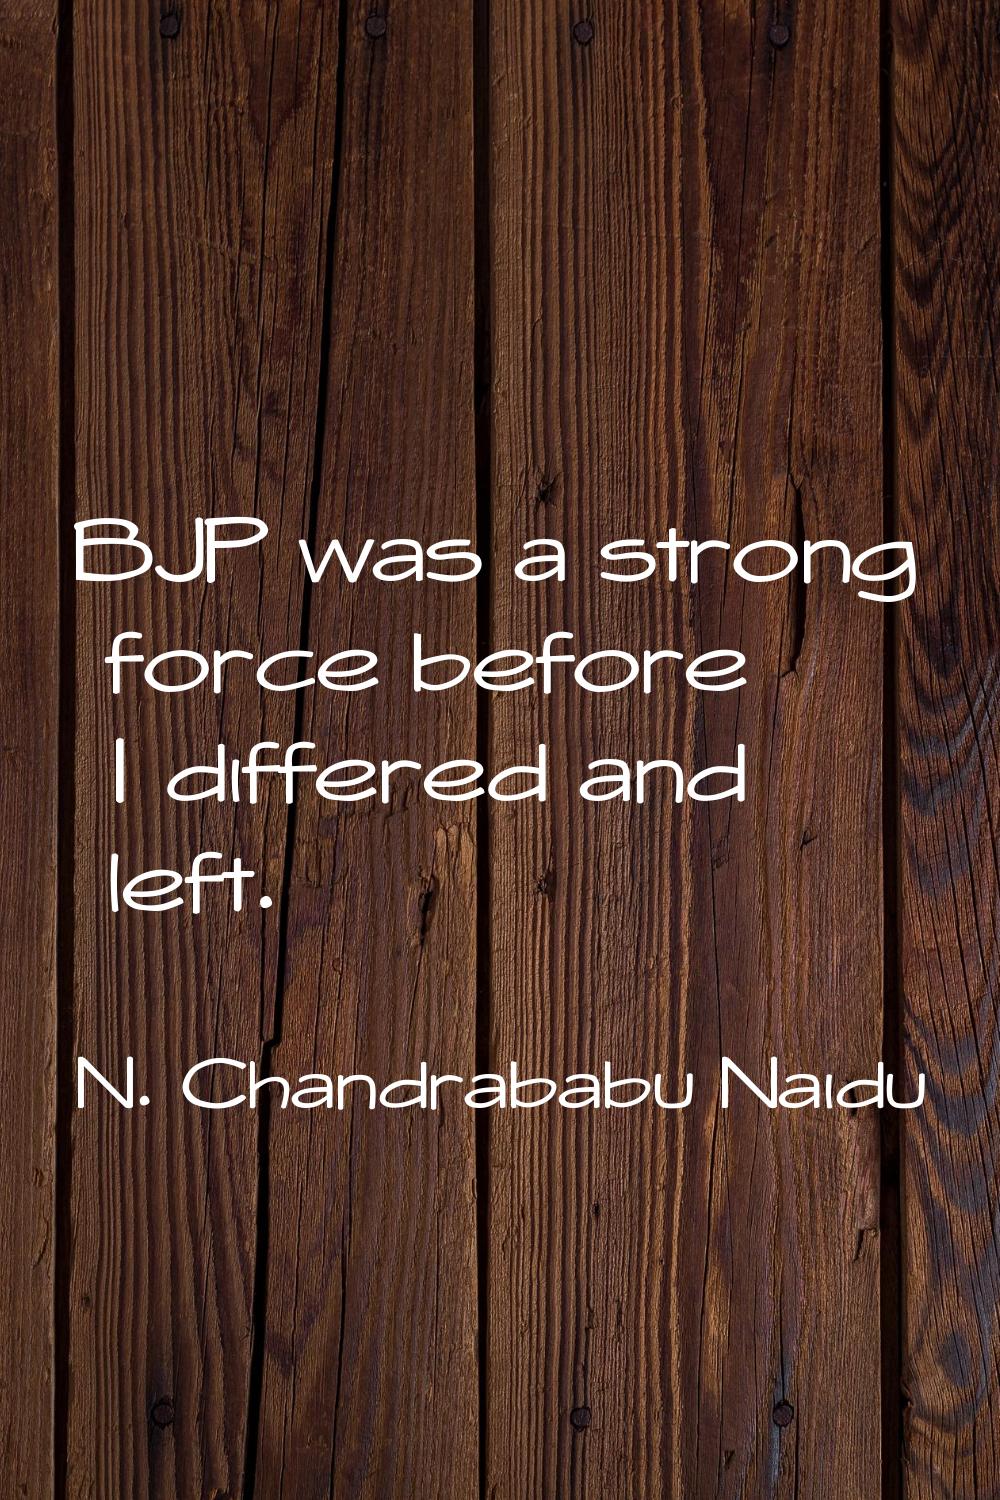 BJP was a strong force before I differed and left.